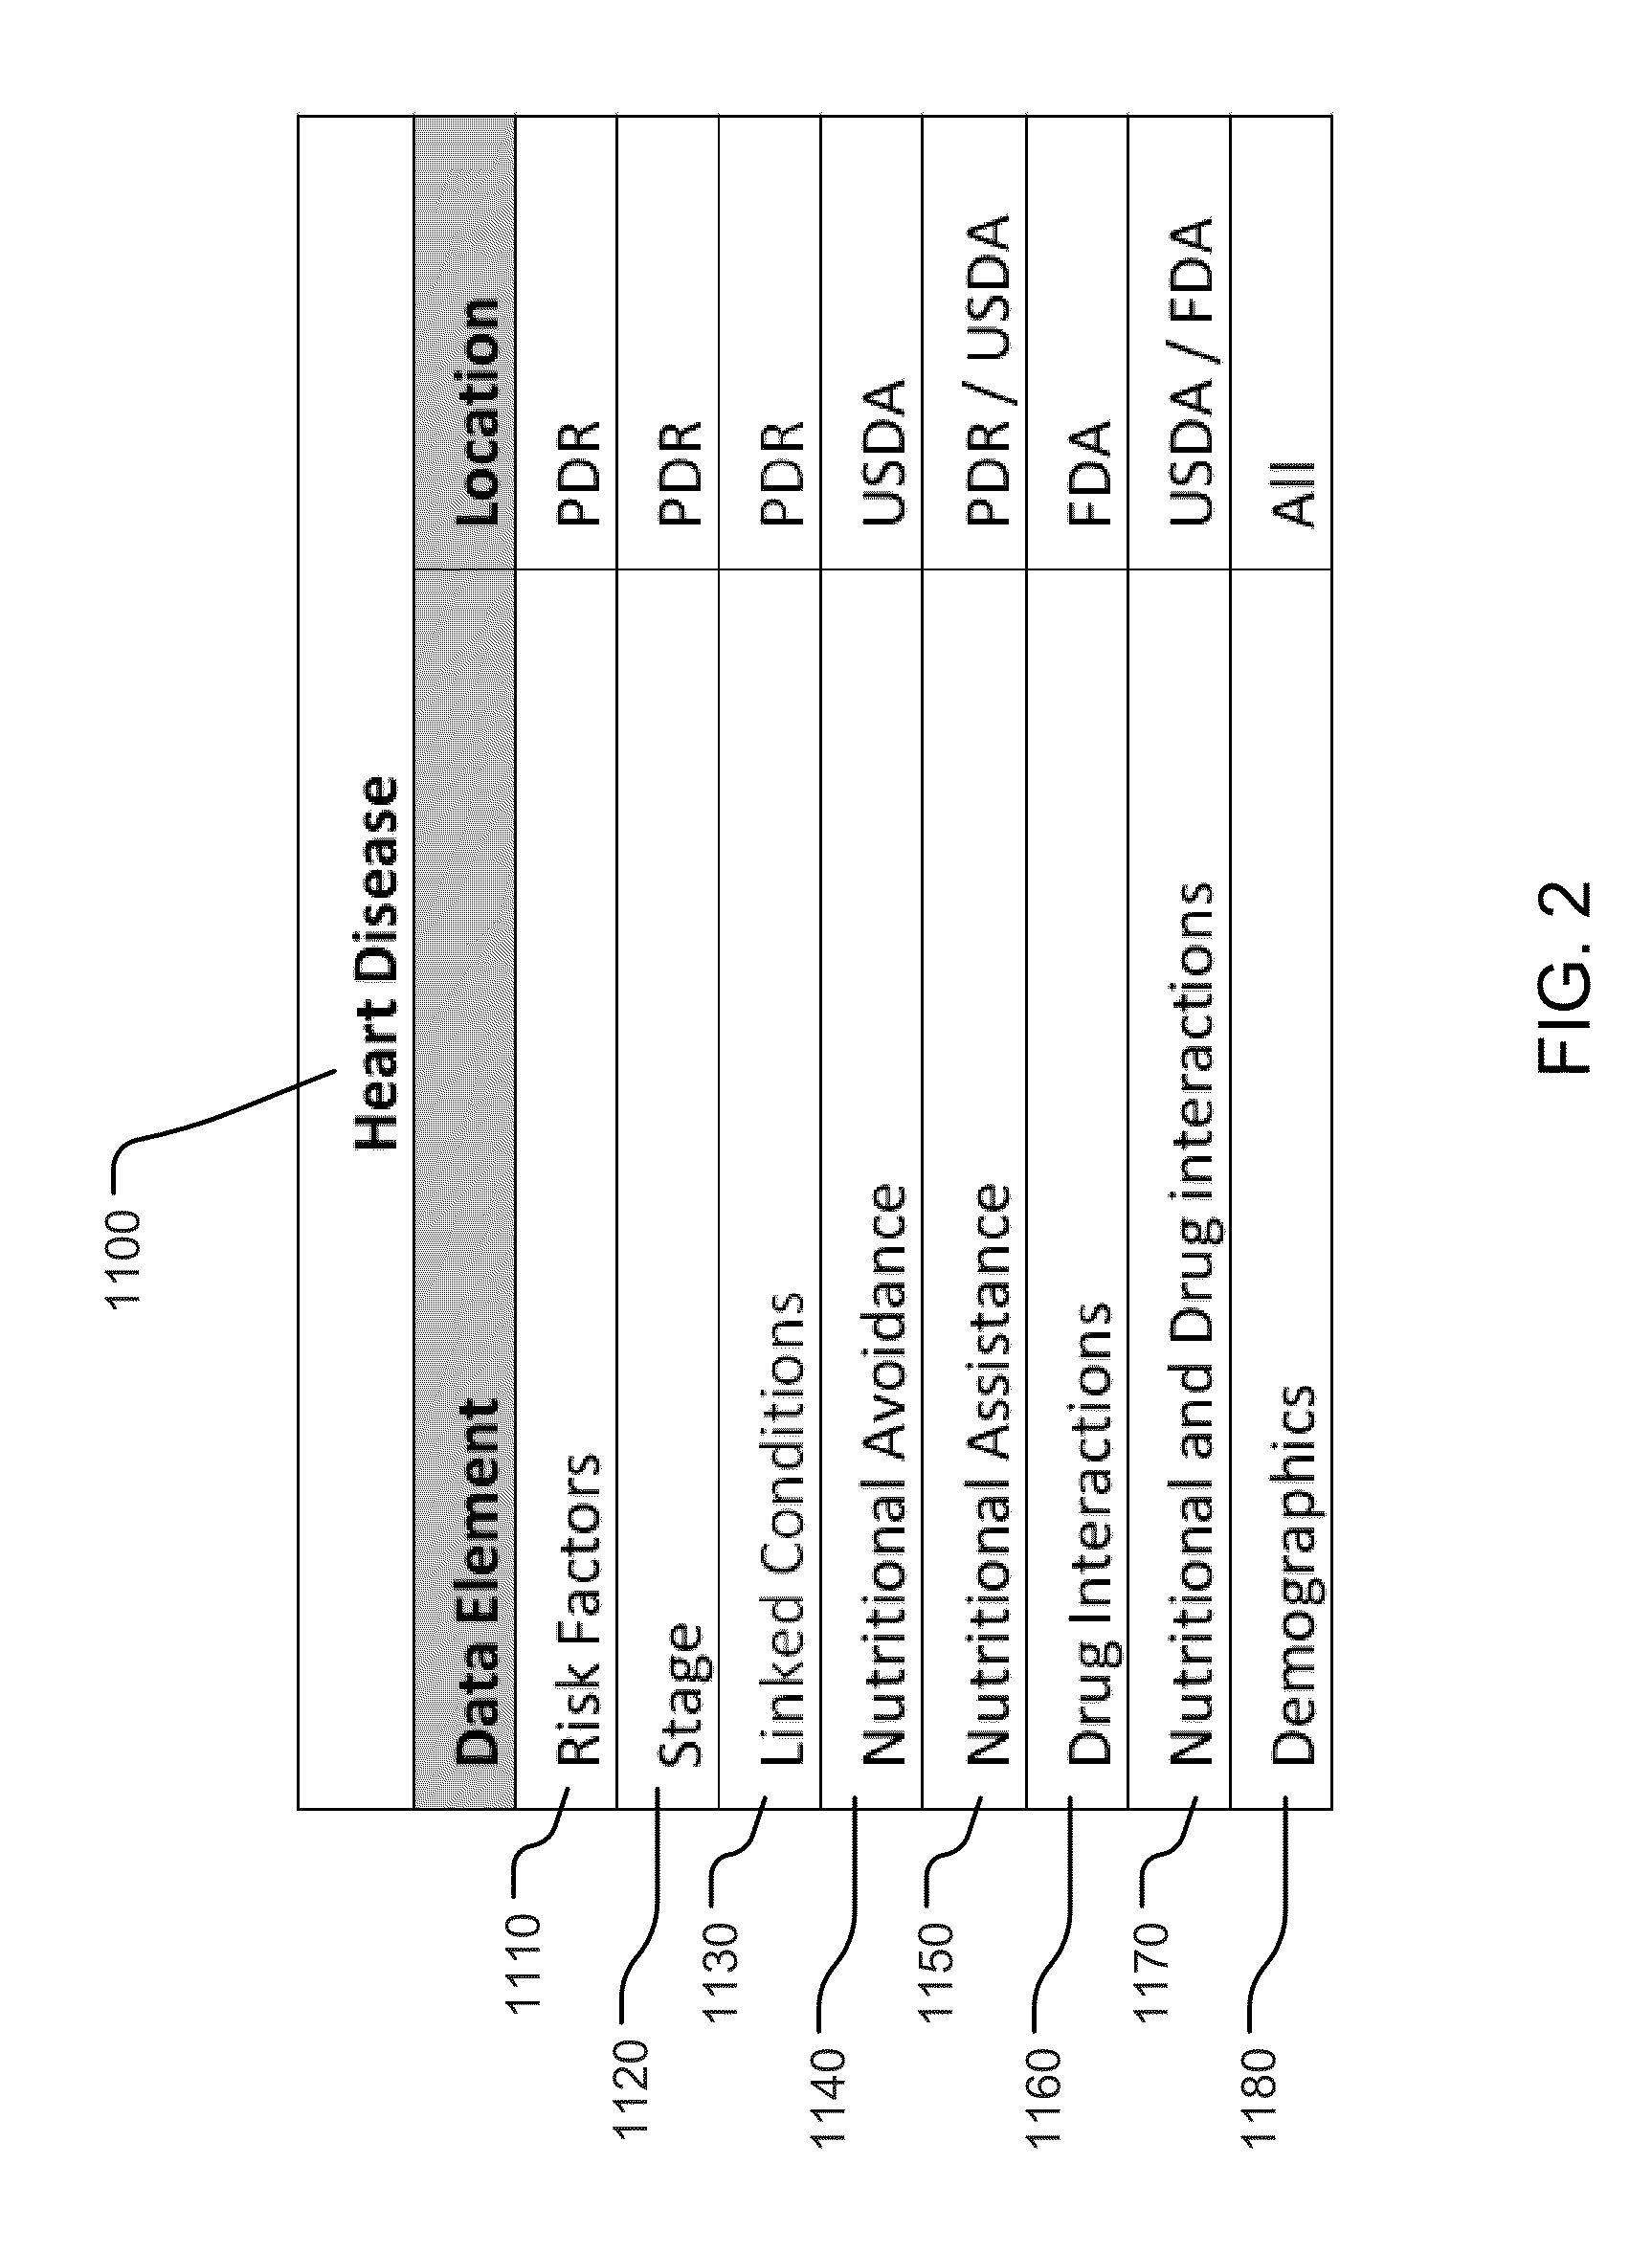 Personal wellbeing device and system